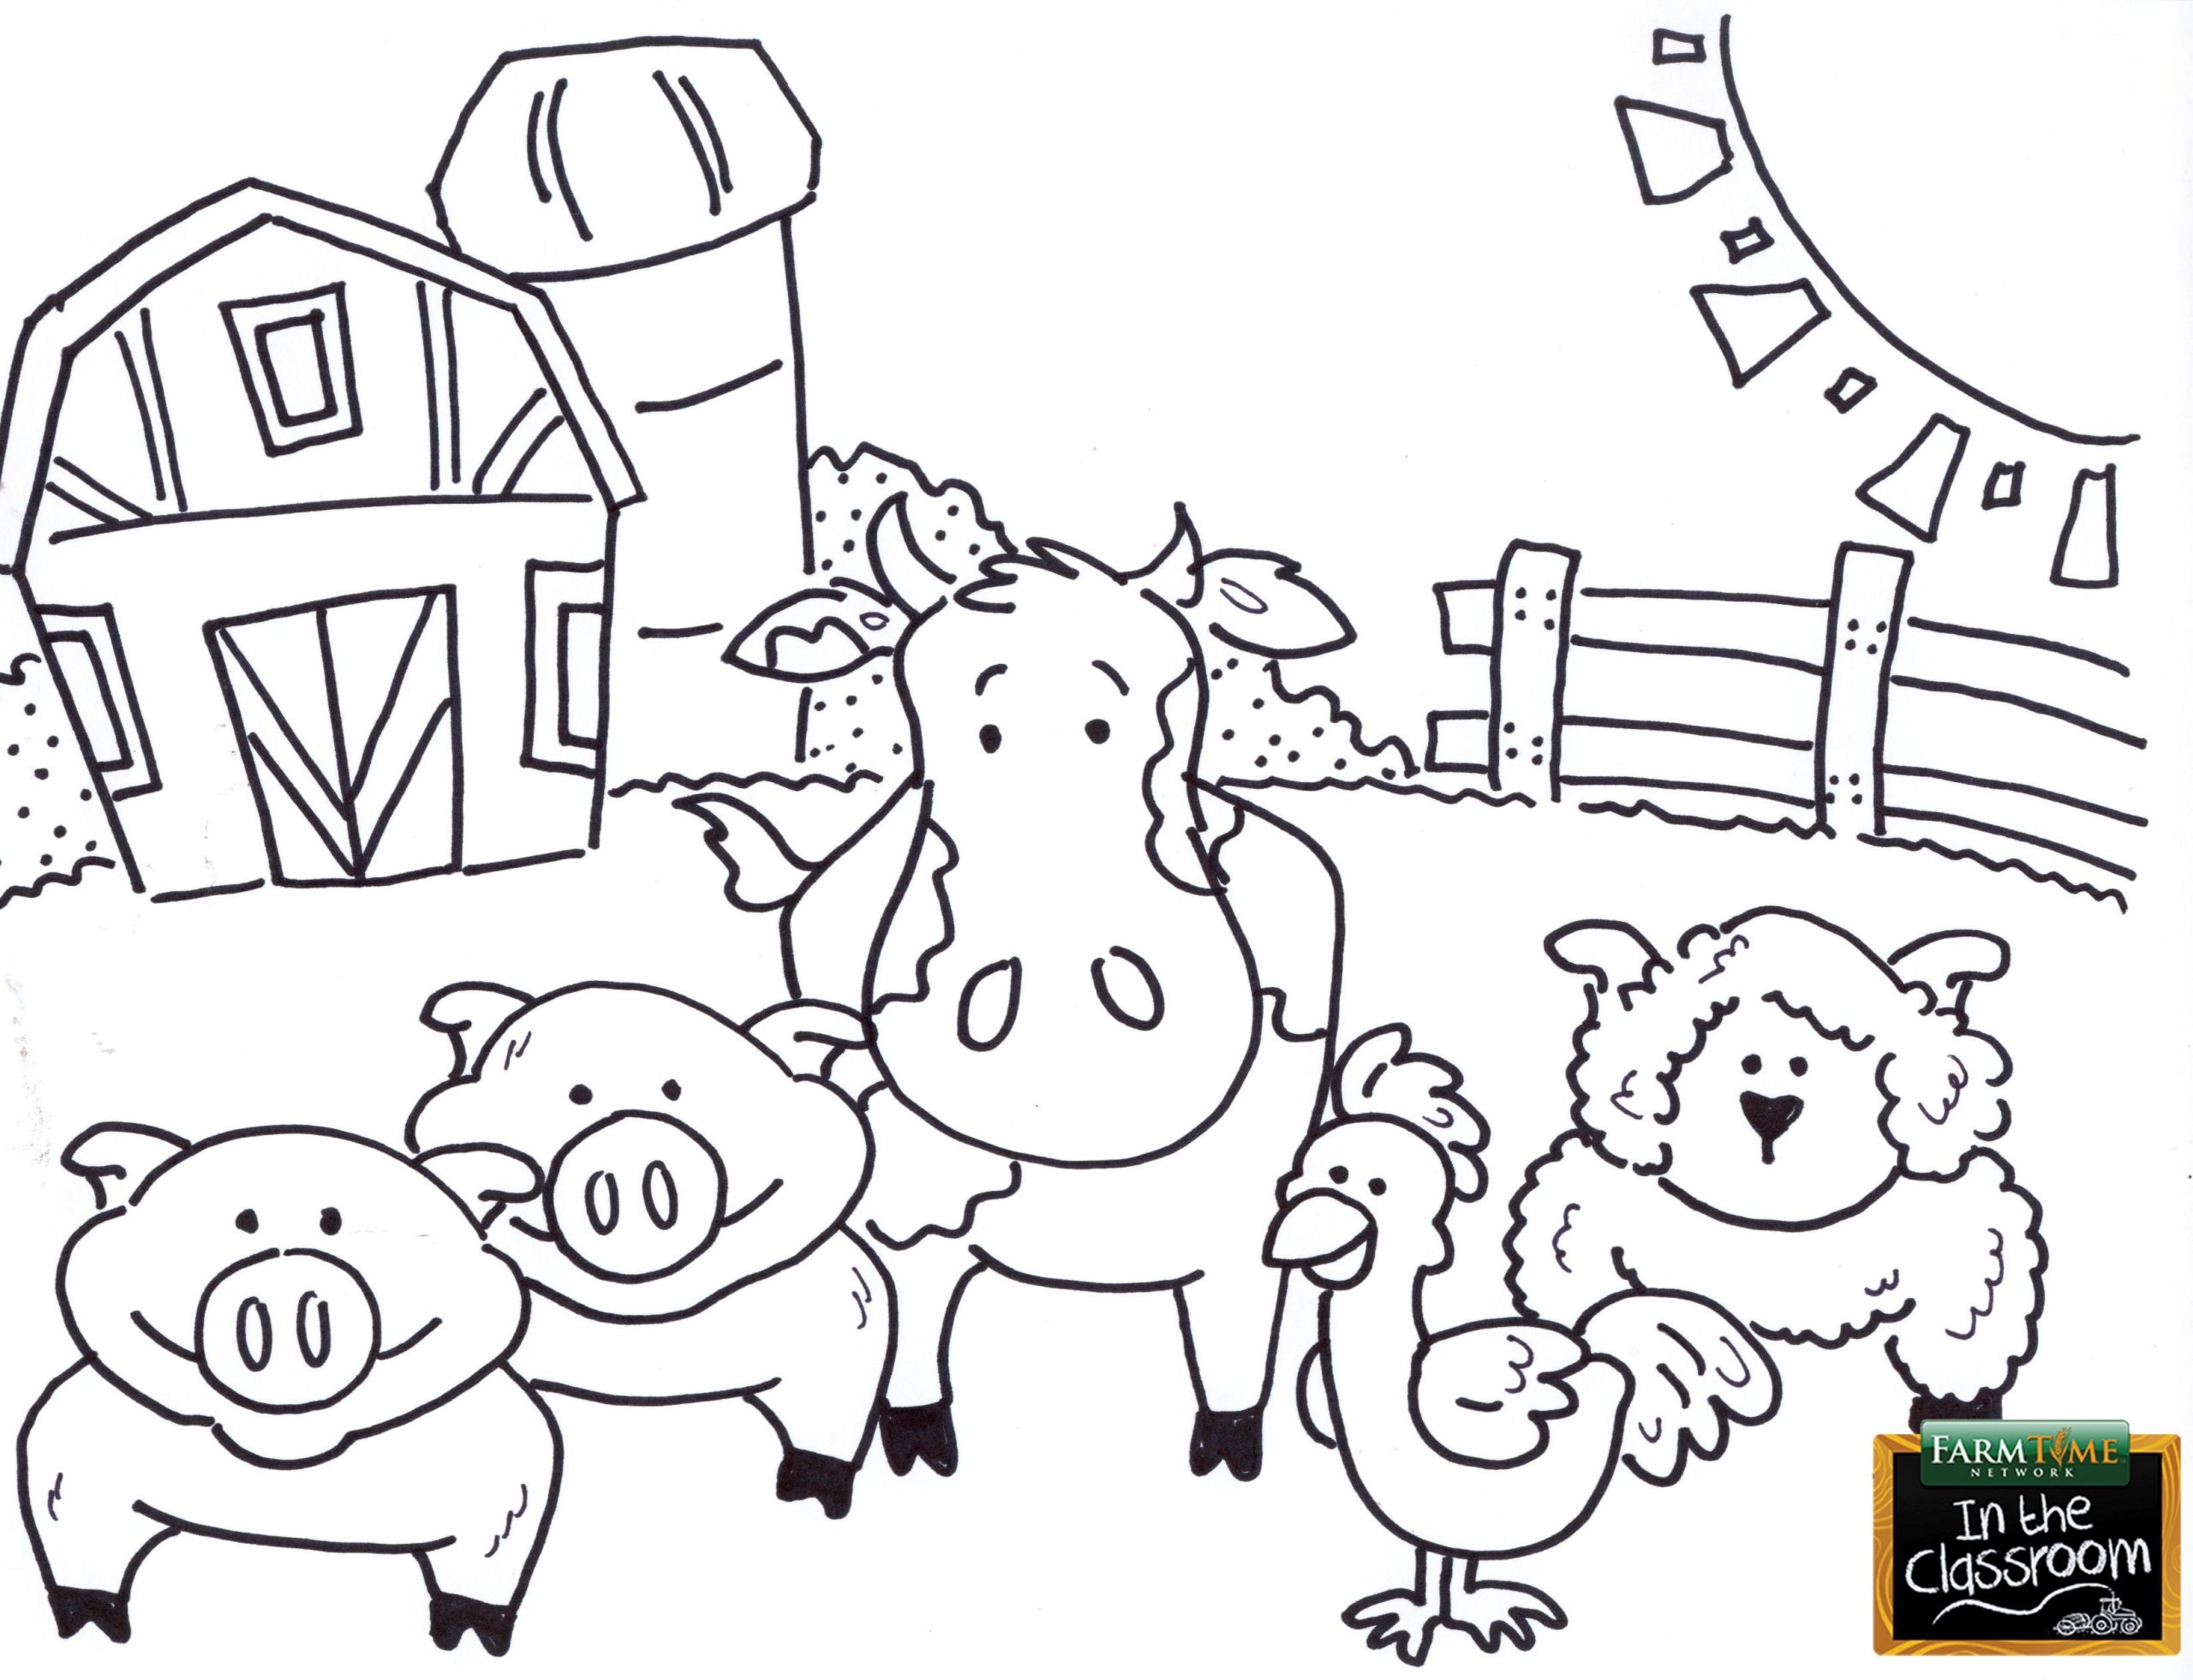 Printable Farm Coloring Pages
 Pin by Caiah Wagner on Agriculture